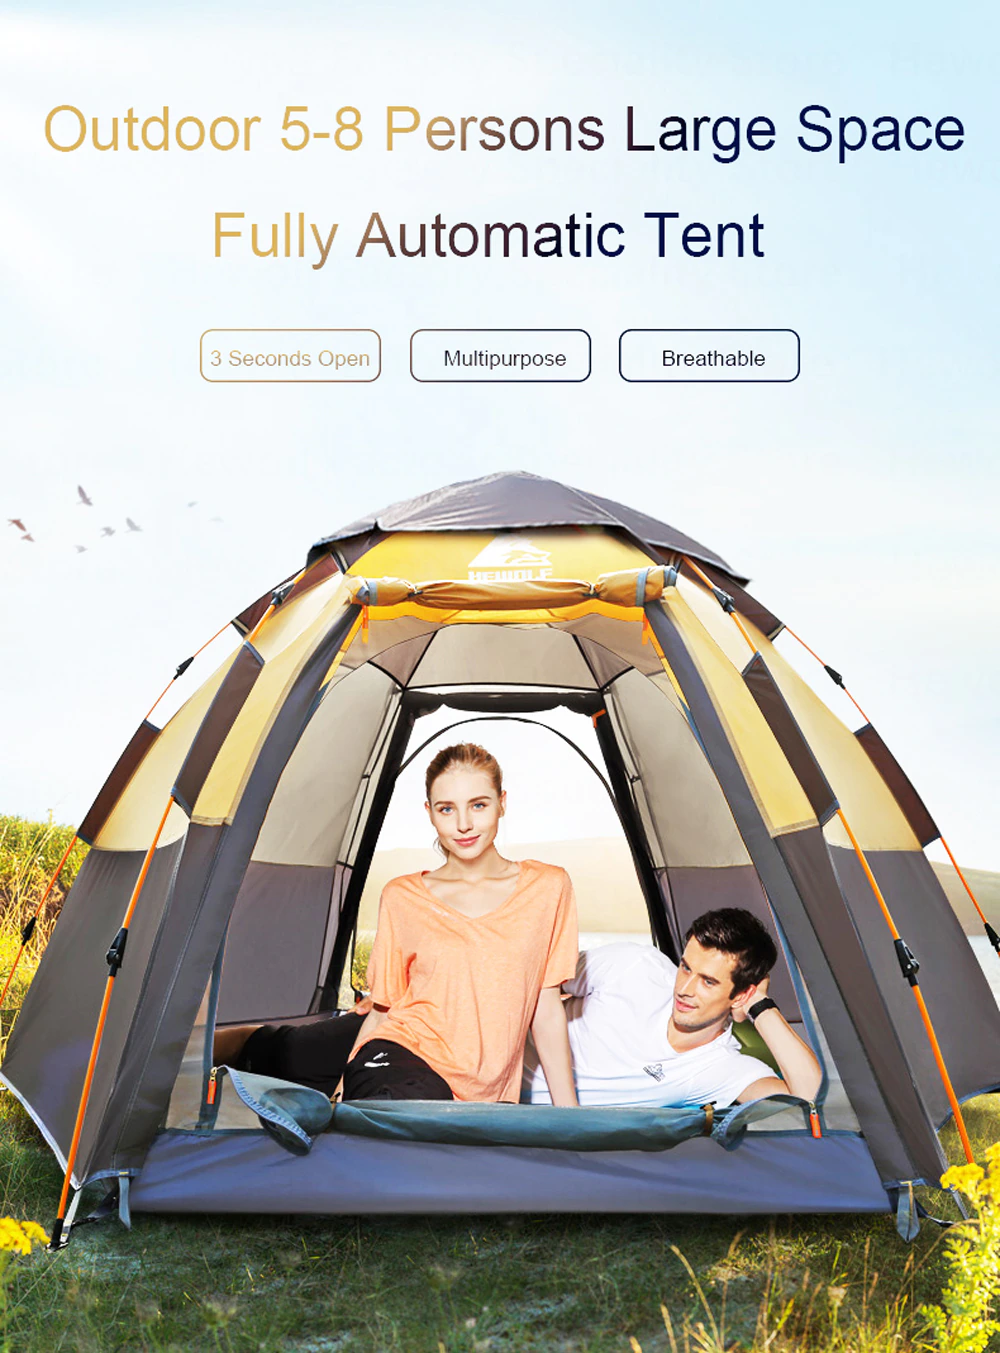 Cheap Goat Tents Outdoor Camping Tent Double Layer Wateroproof Family Automatic Tents 5 8 Persons Portable Breathable Outdoor Travel Hiking Tent Tents